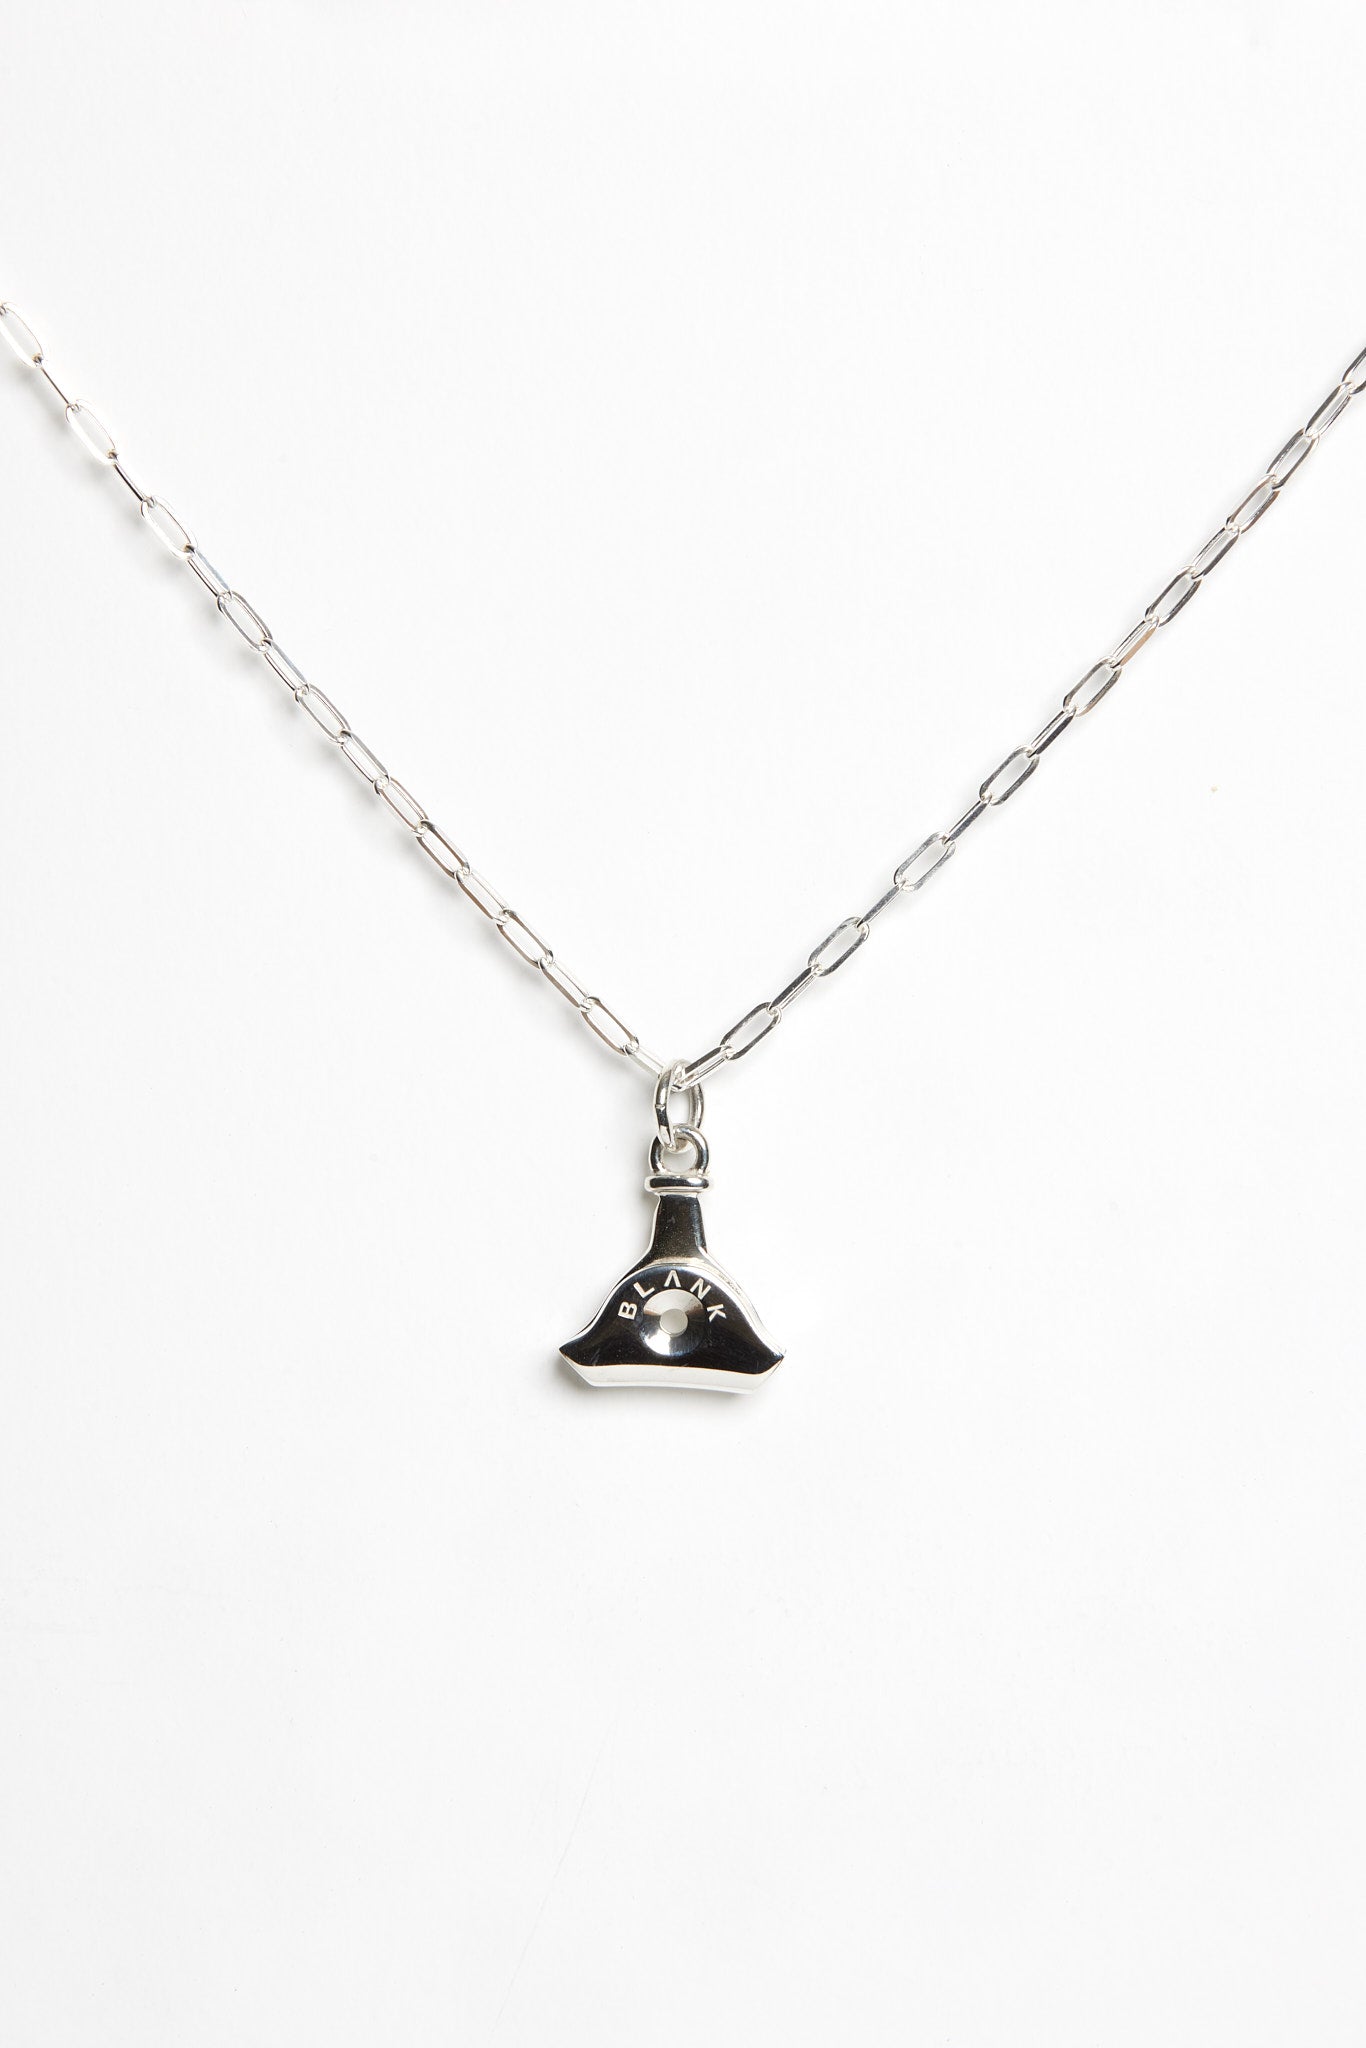 DAINTY WHISTLE NECKLACE